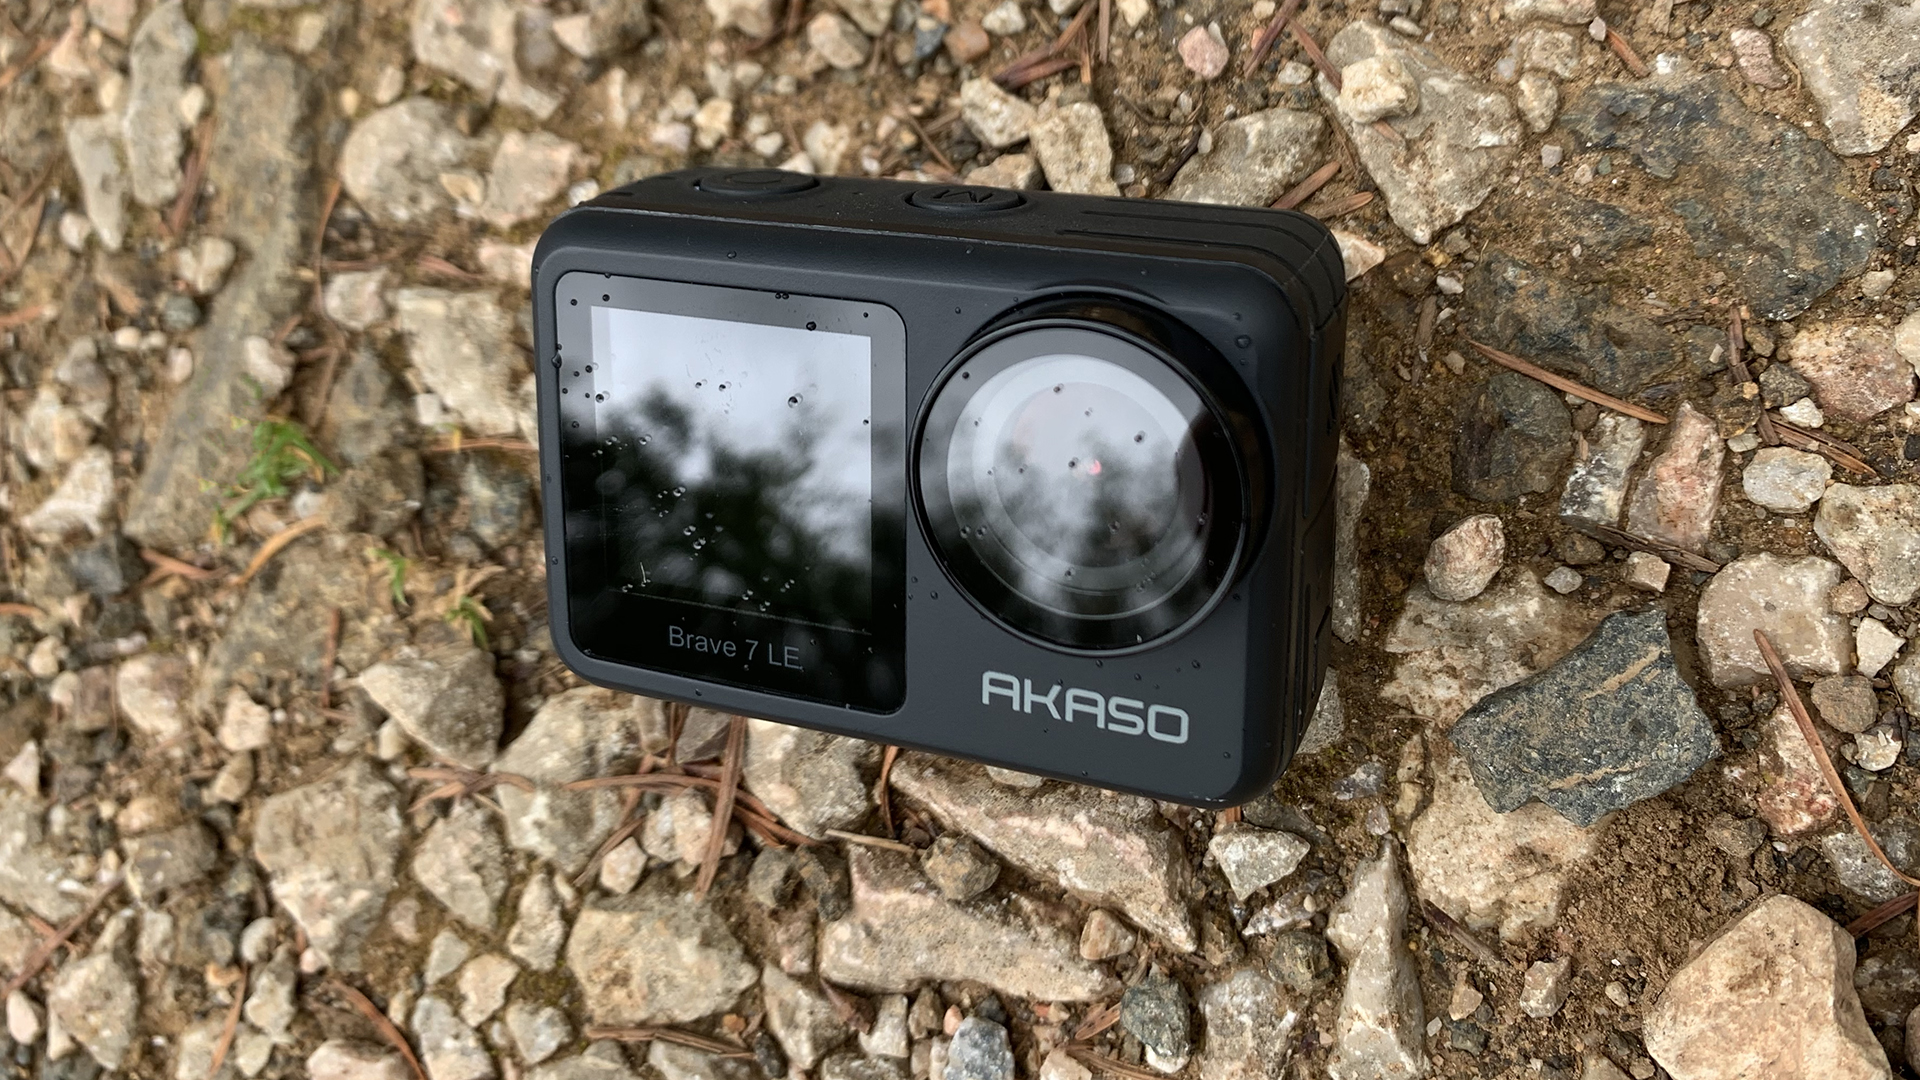 Akaso Brave 7 LE action camera review: A front screen-enabled